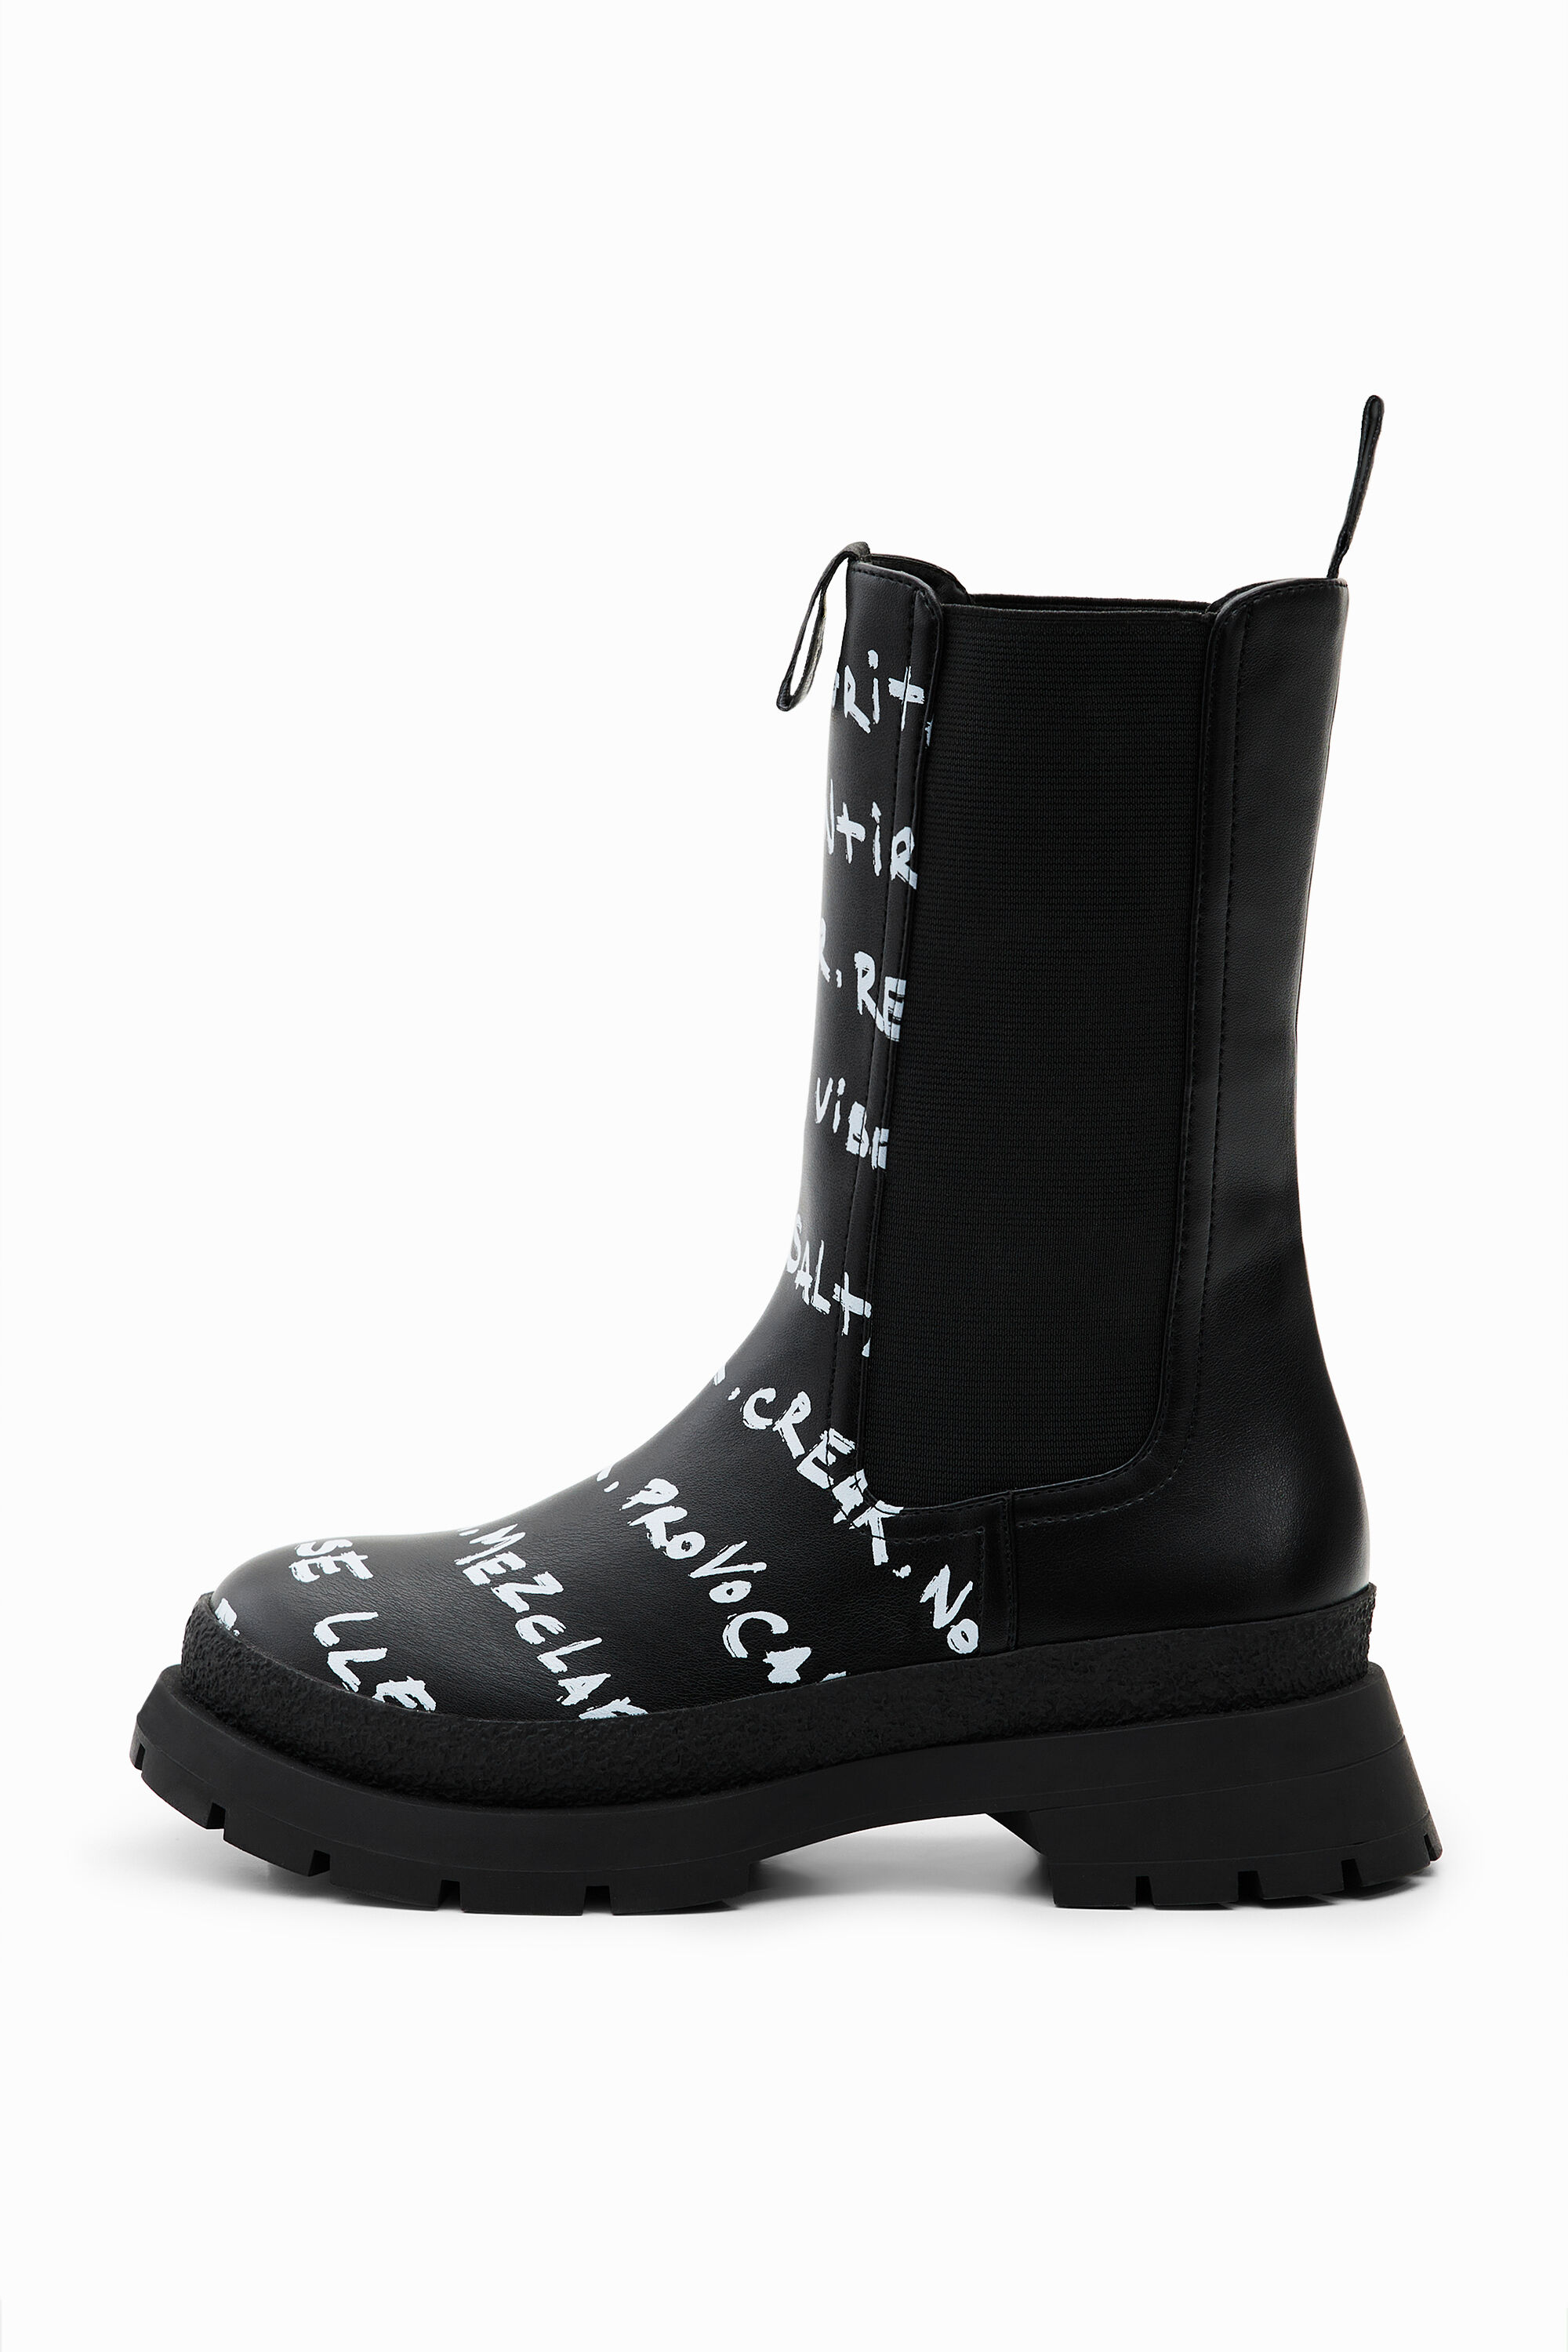 High Chelsea boots with messages - BLACK - 39